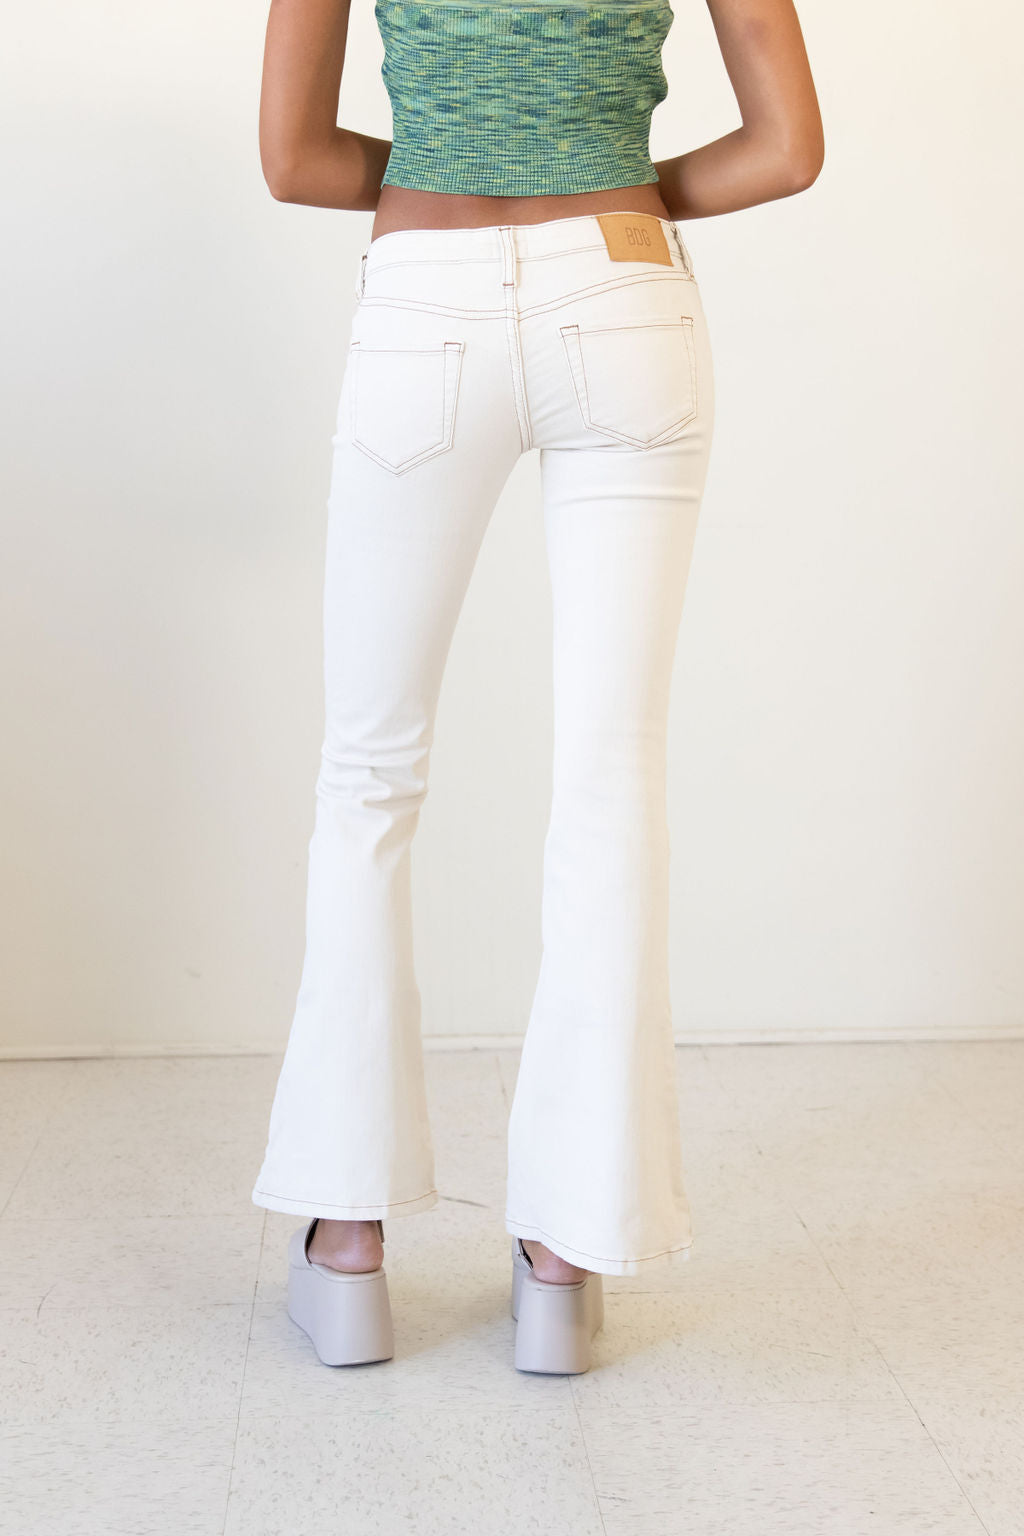 Low Rise Flare Jeans by BDG